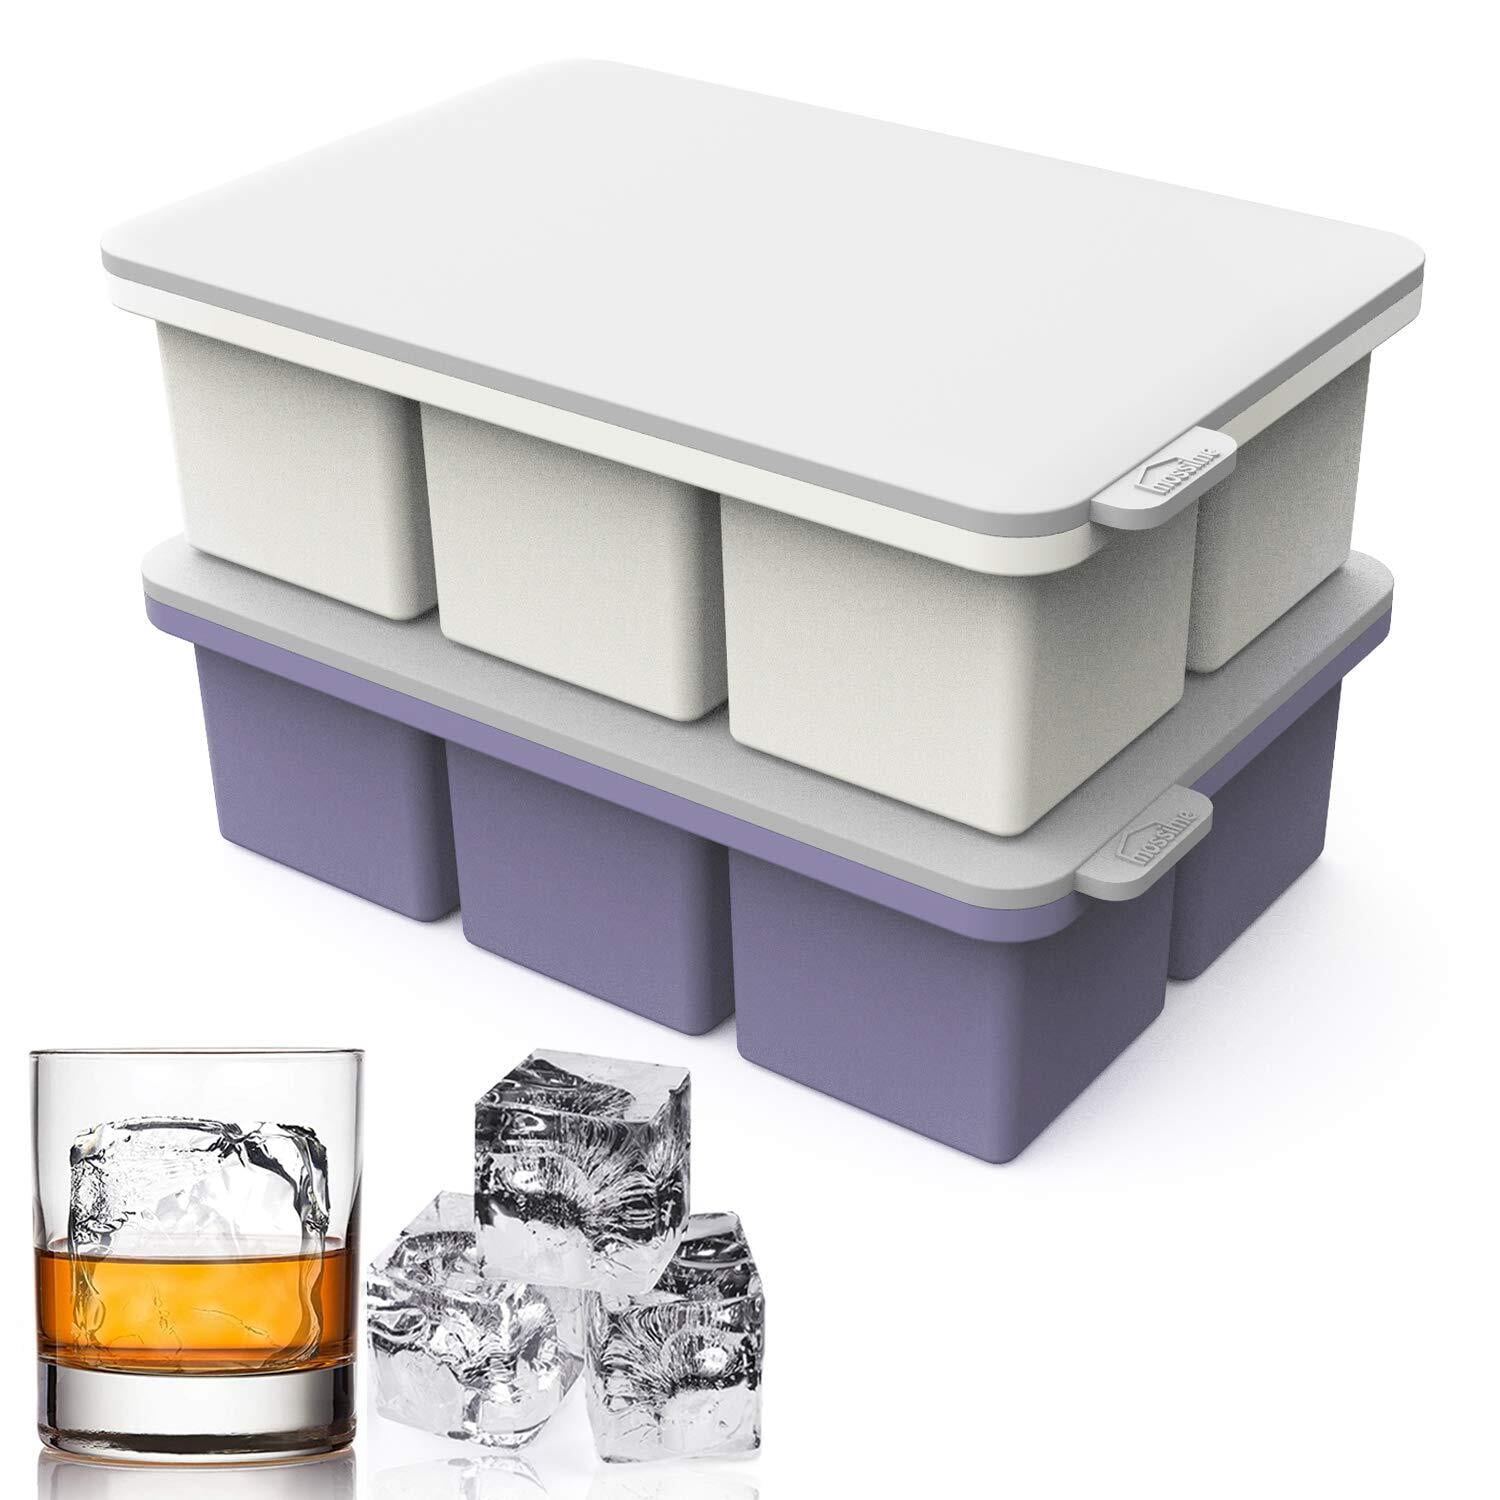 TeQable Premium Large Ice Cube Tray - Big 2-Inch Square Silicone Ice Cube  Molds with Removable Lids - Food Grade, Reusable, BPA Free - Ideal for